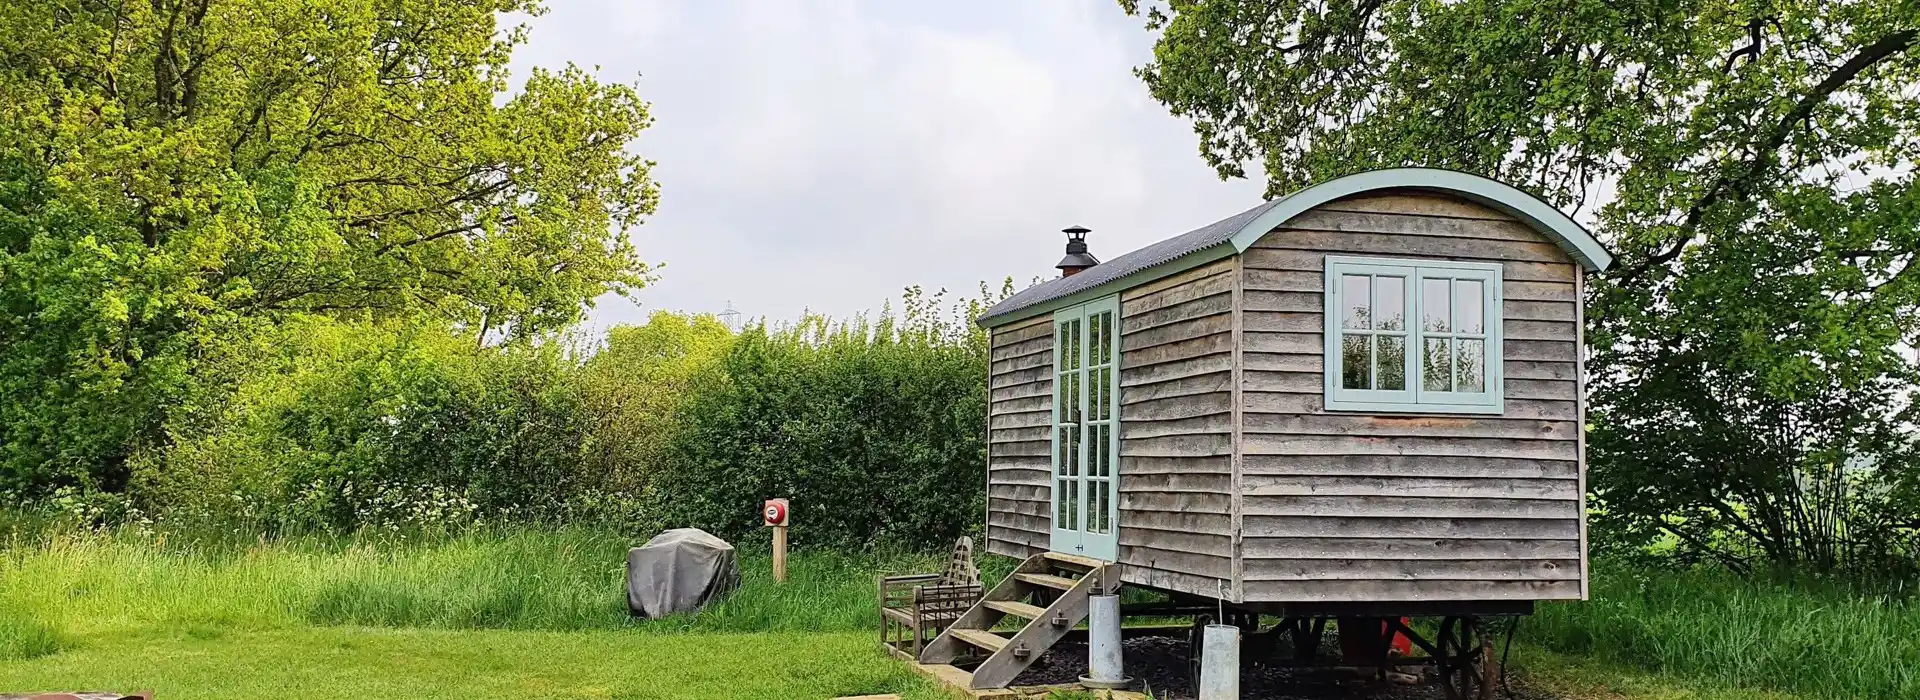 Glamping in Essex